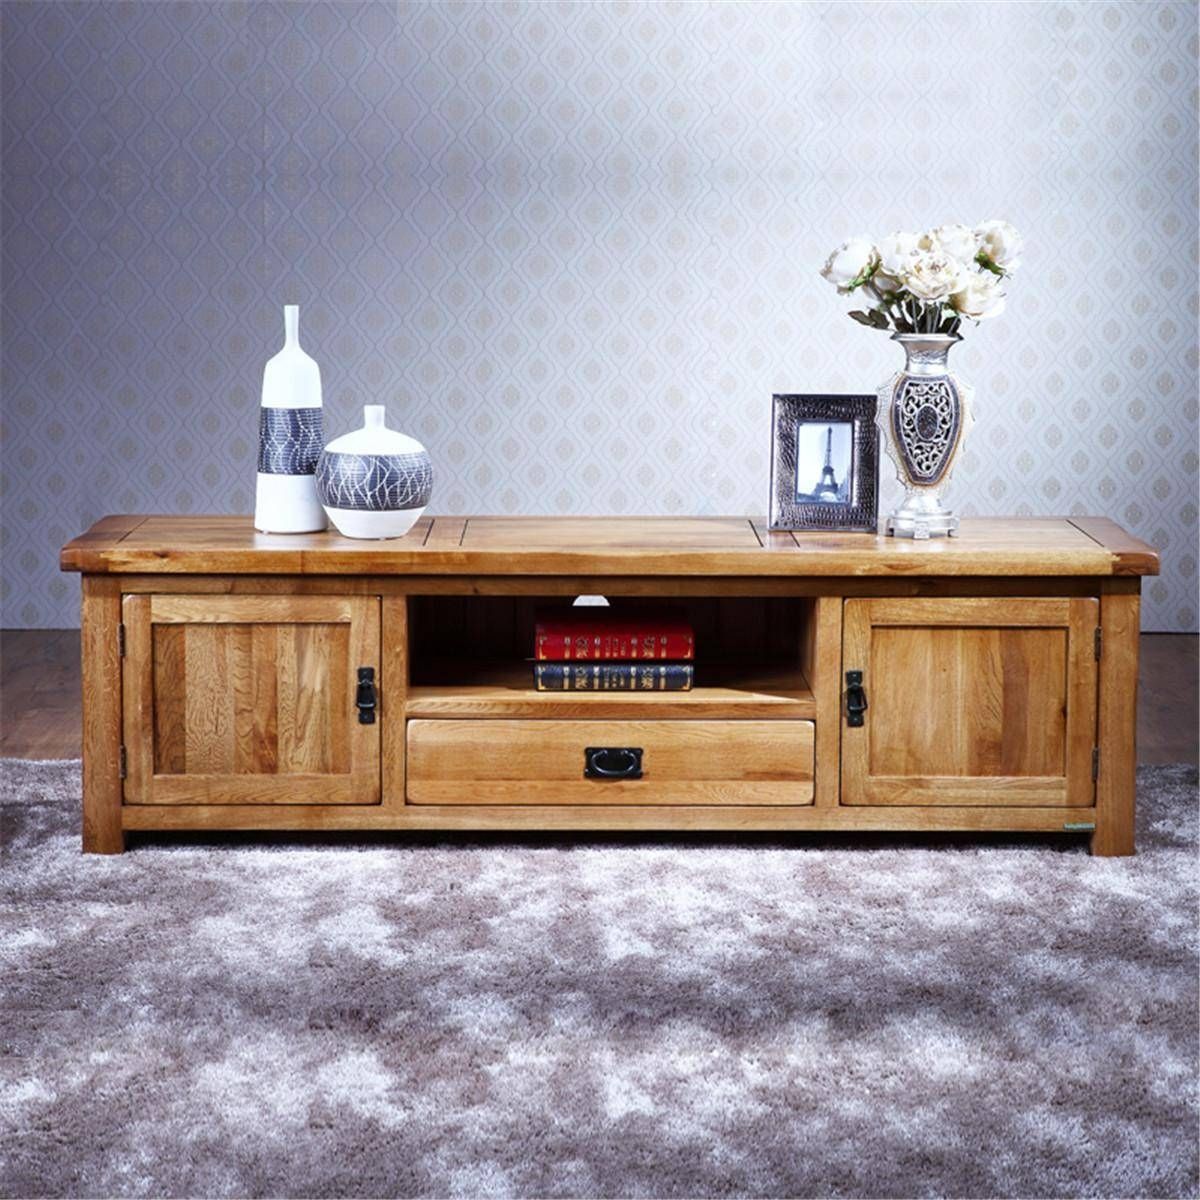 2017 100% Pure Solid Wood Tv Stand Oak Tv Stand Media Console Pertaining To Tv Stands In Oak (View 3 of 15)